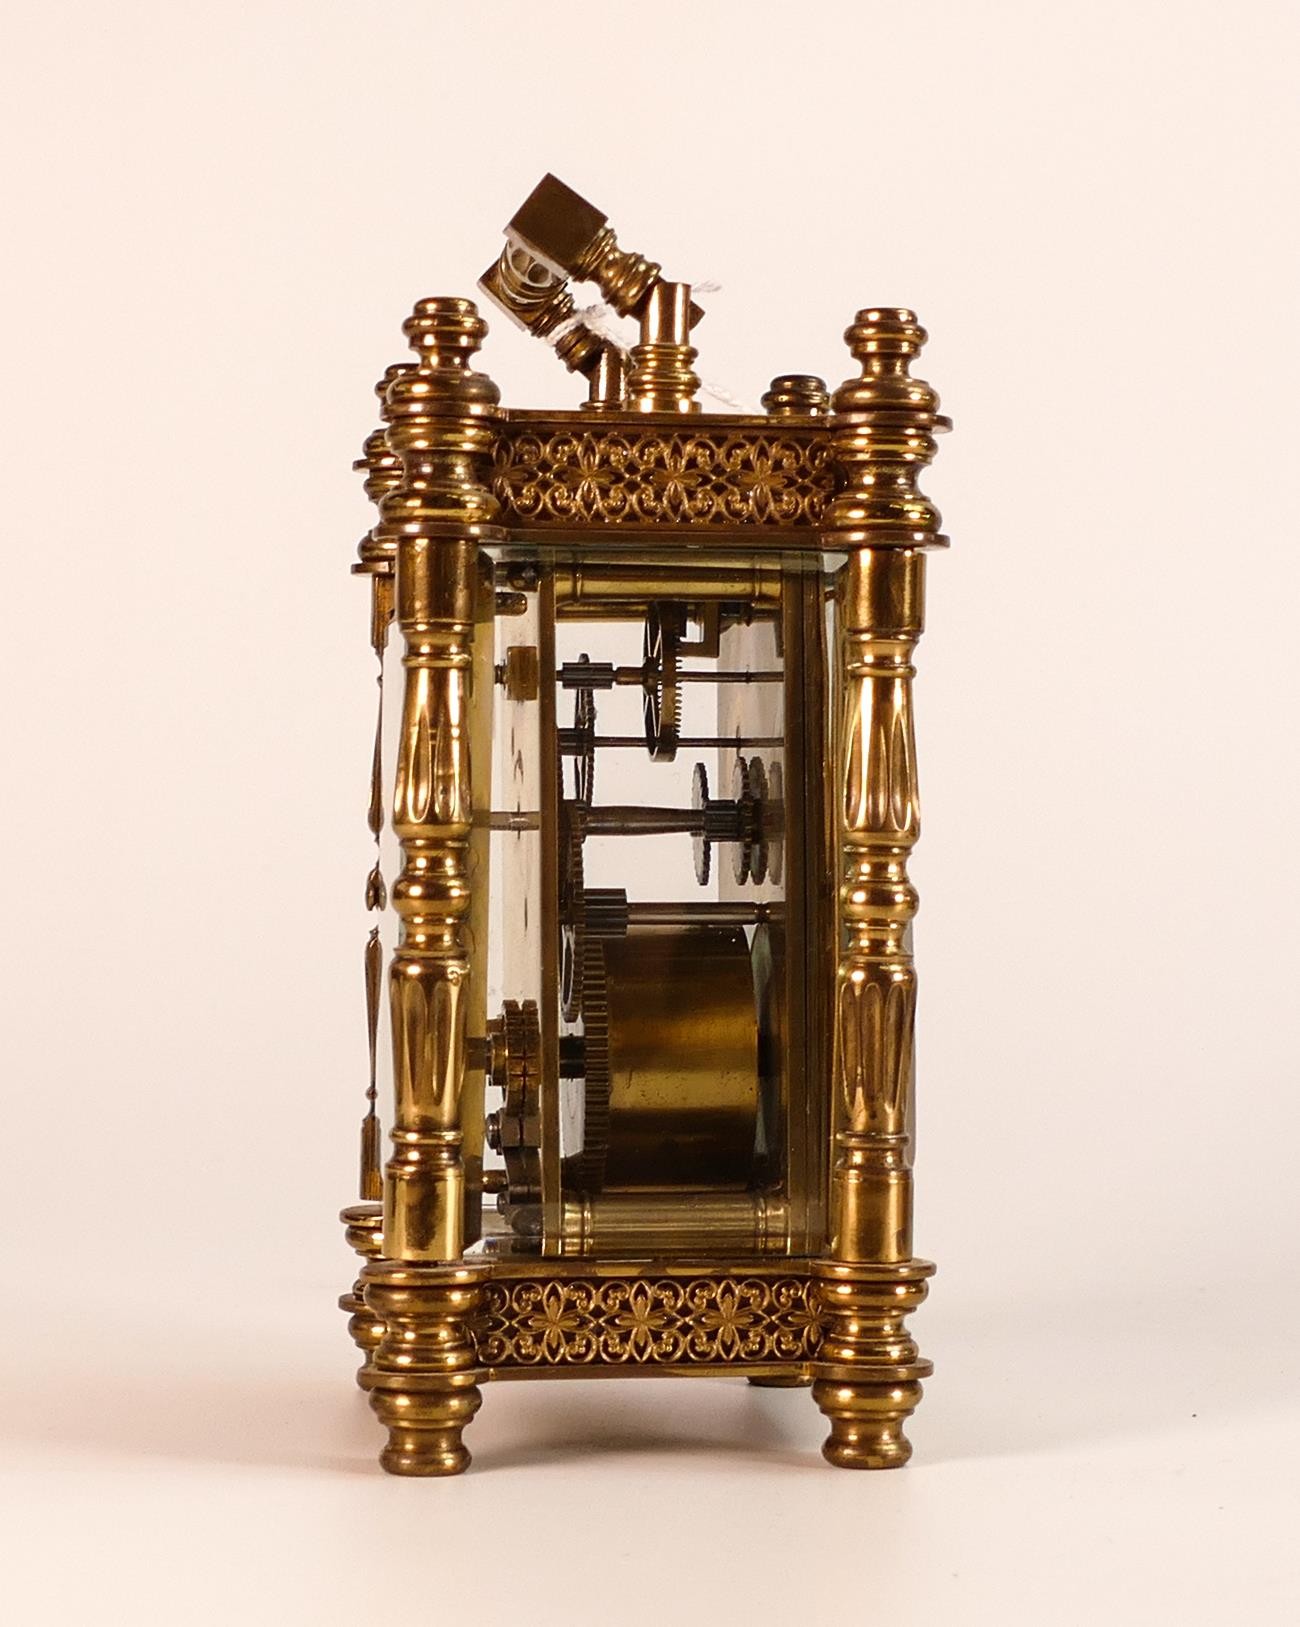 Exceedingly ornate brass carriage clock, late 19th century, no key, sold as not working. 15cm high - Image 5 of 6